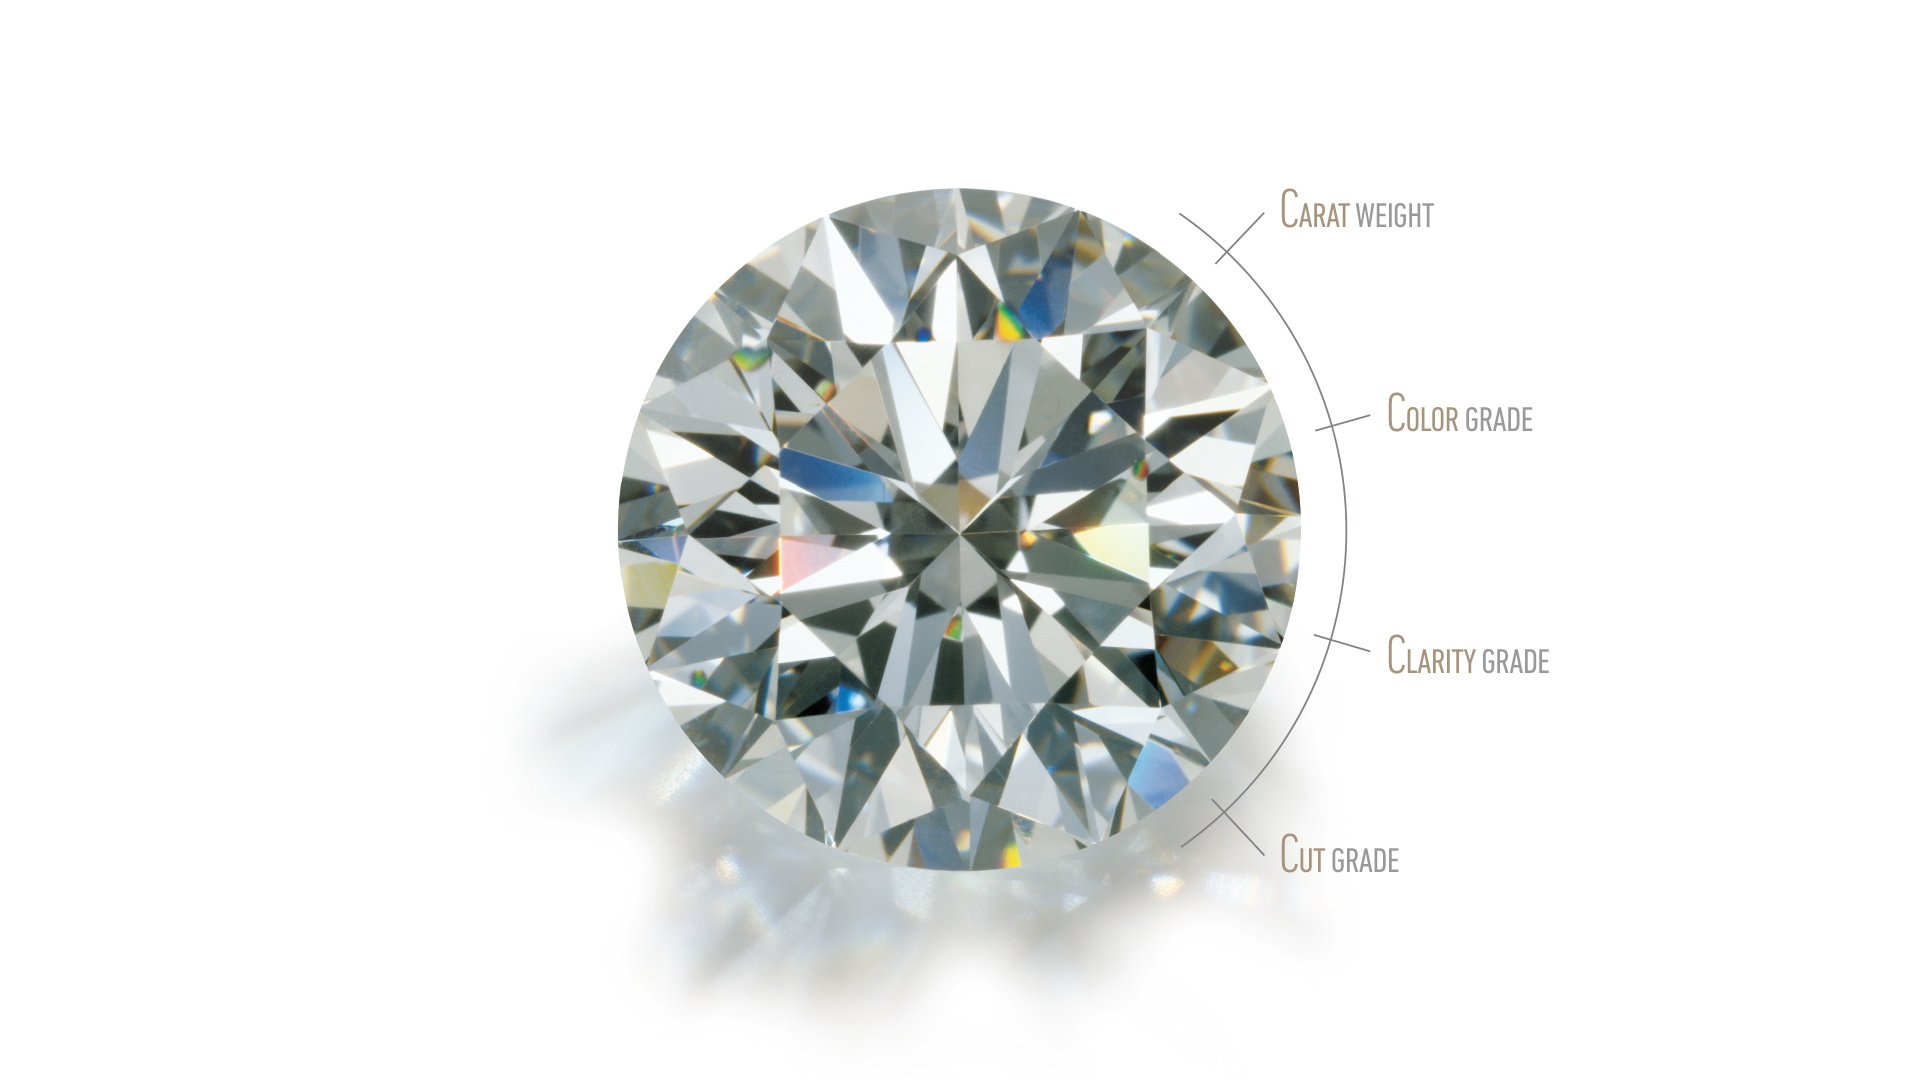 A round brilliant cut diamond with a graphic overlay explaining the 4Cs - color, cut, clarity and carat weight.